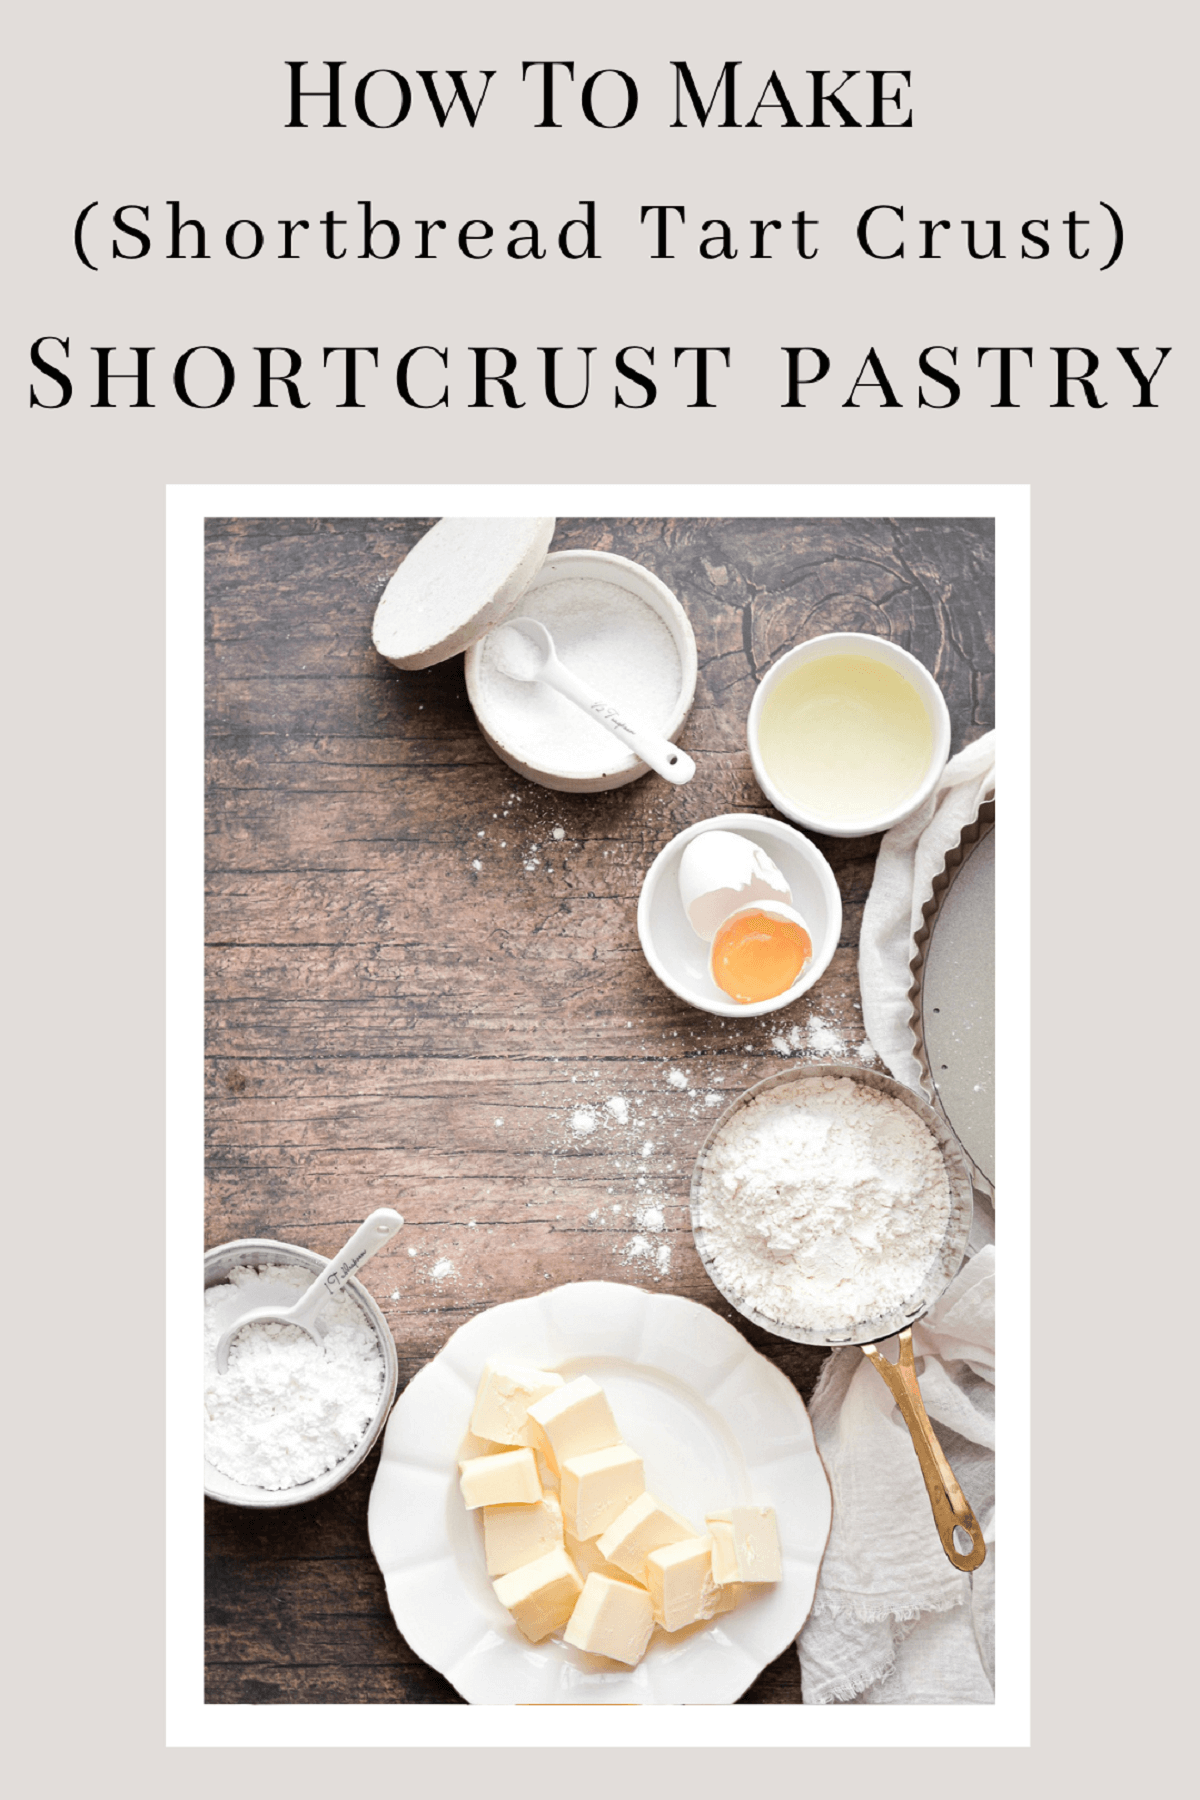 A graphic on how to make shortcrust pastry tart crust.